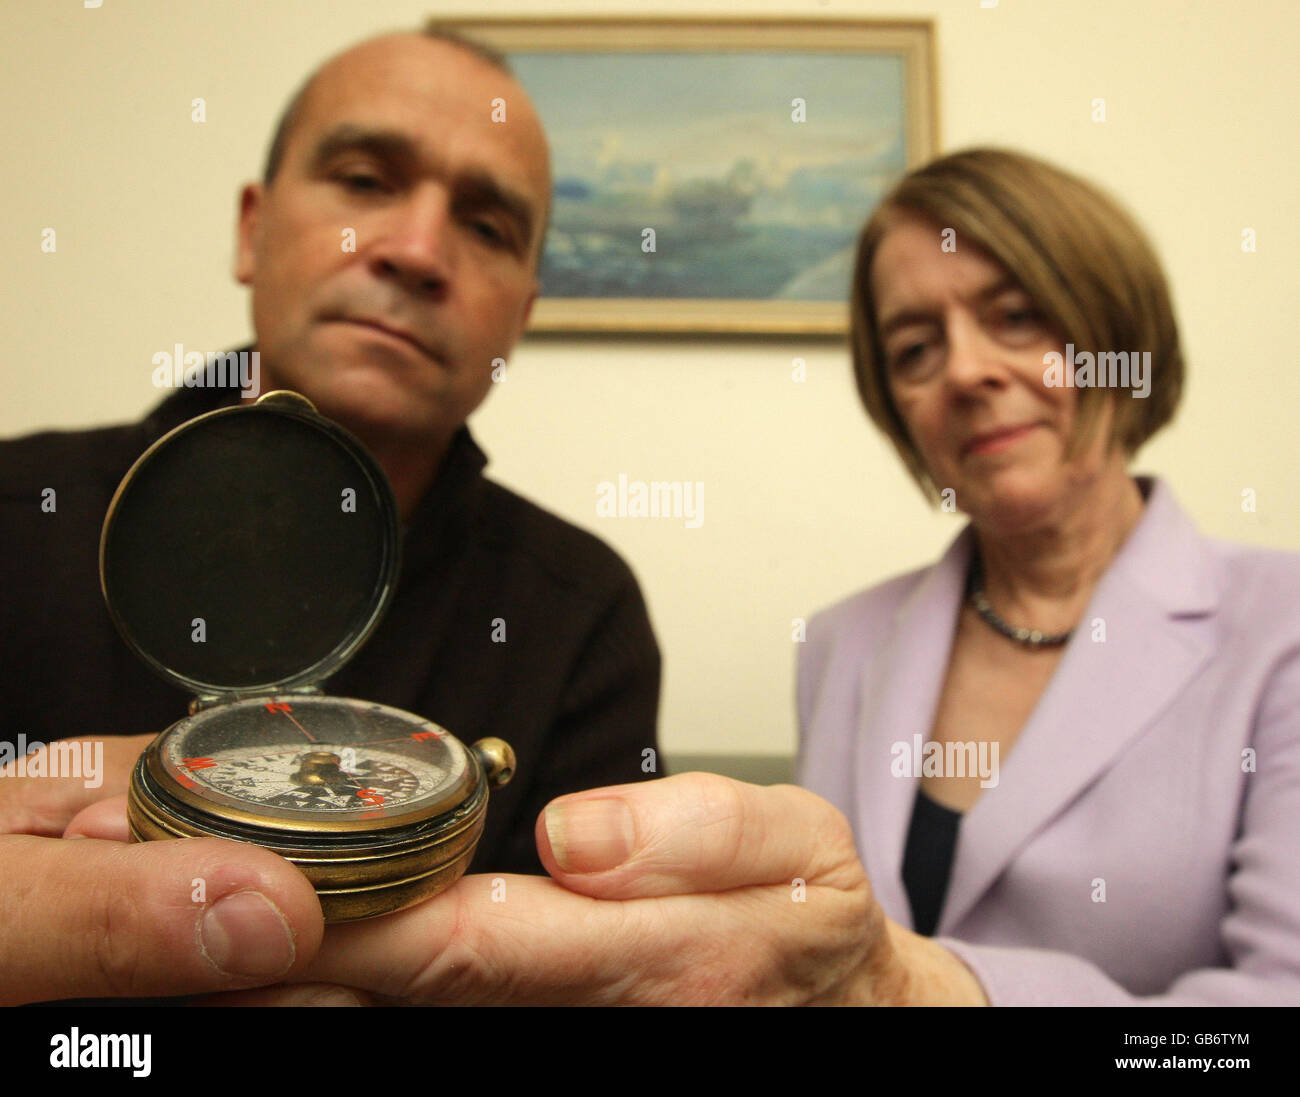 Alexandra Shackleton, the granddaughter of Antarctic explorer Ernest Shackleton at her home in Hammersmith, London, presents Shackleton's compass to explorer Henry Worley, who will set off on the Matrix Shackleton Centenary Expedition in November 2008, recreating Shackleton's 'Nimrod' expedition to reach the south pole. Stock Photo